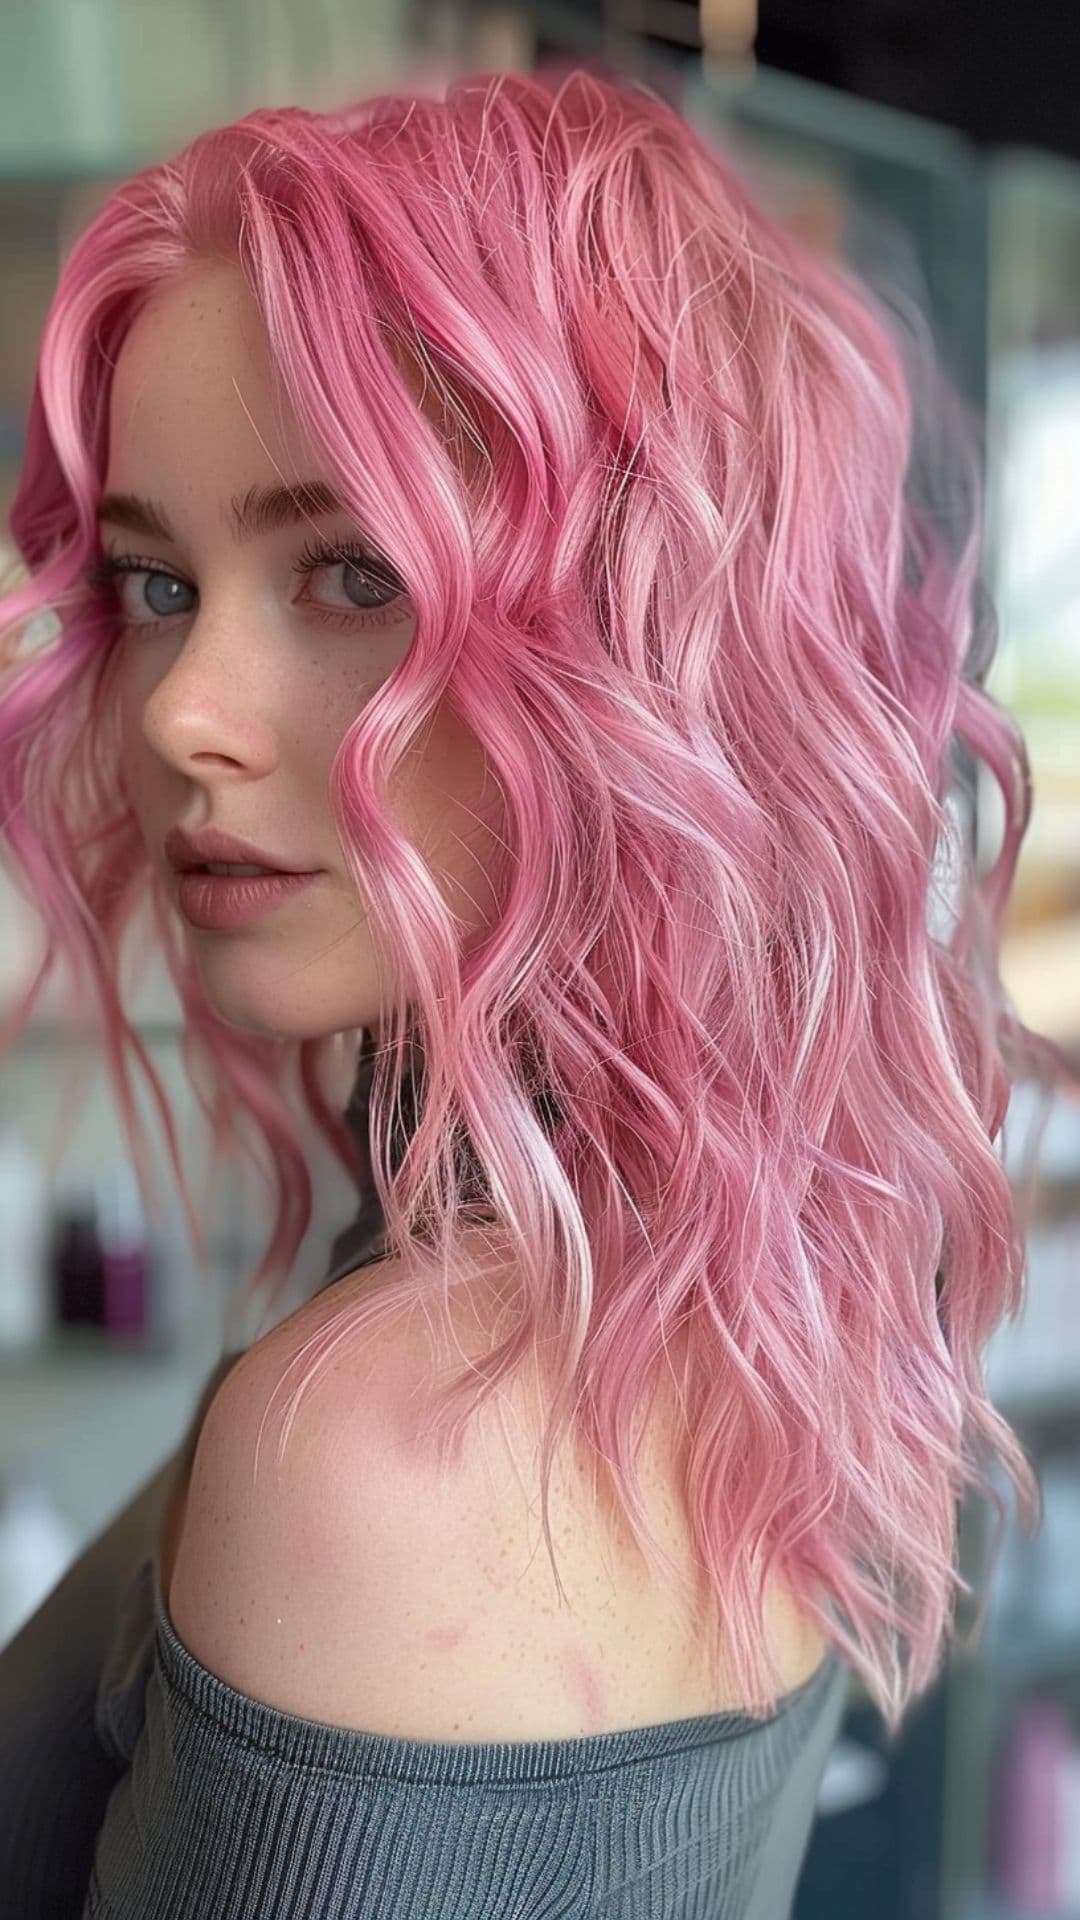 A woman modelling a cotton candy pink waves hair.